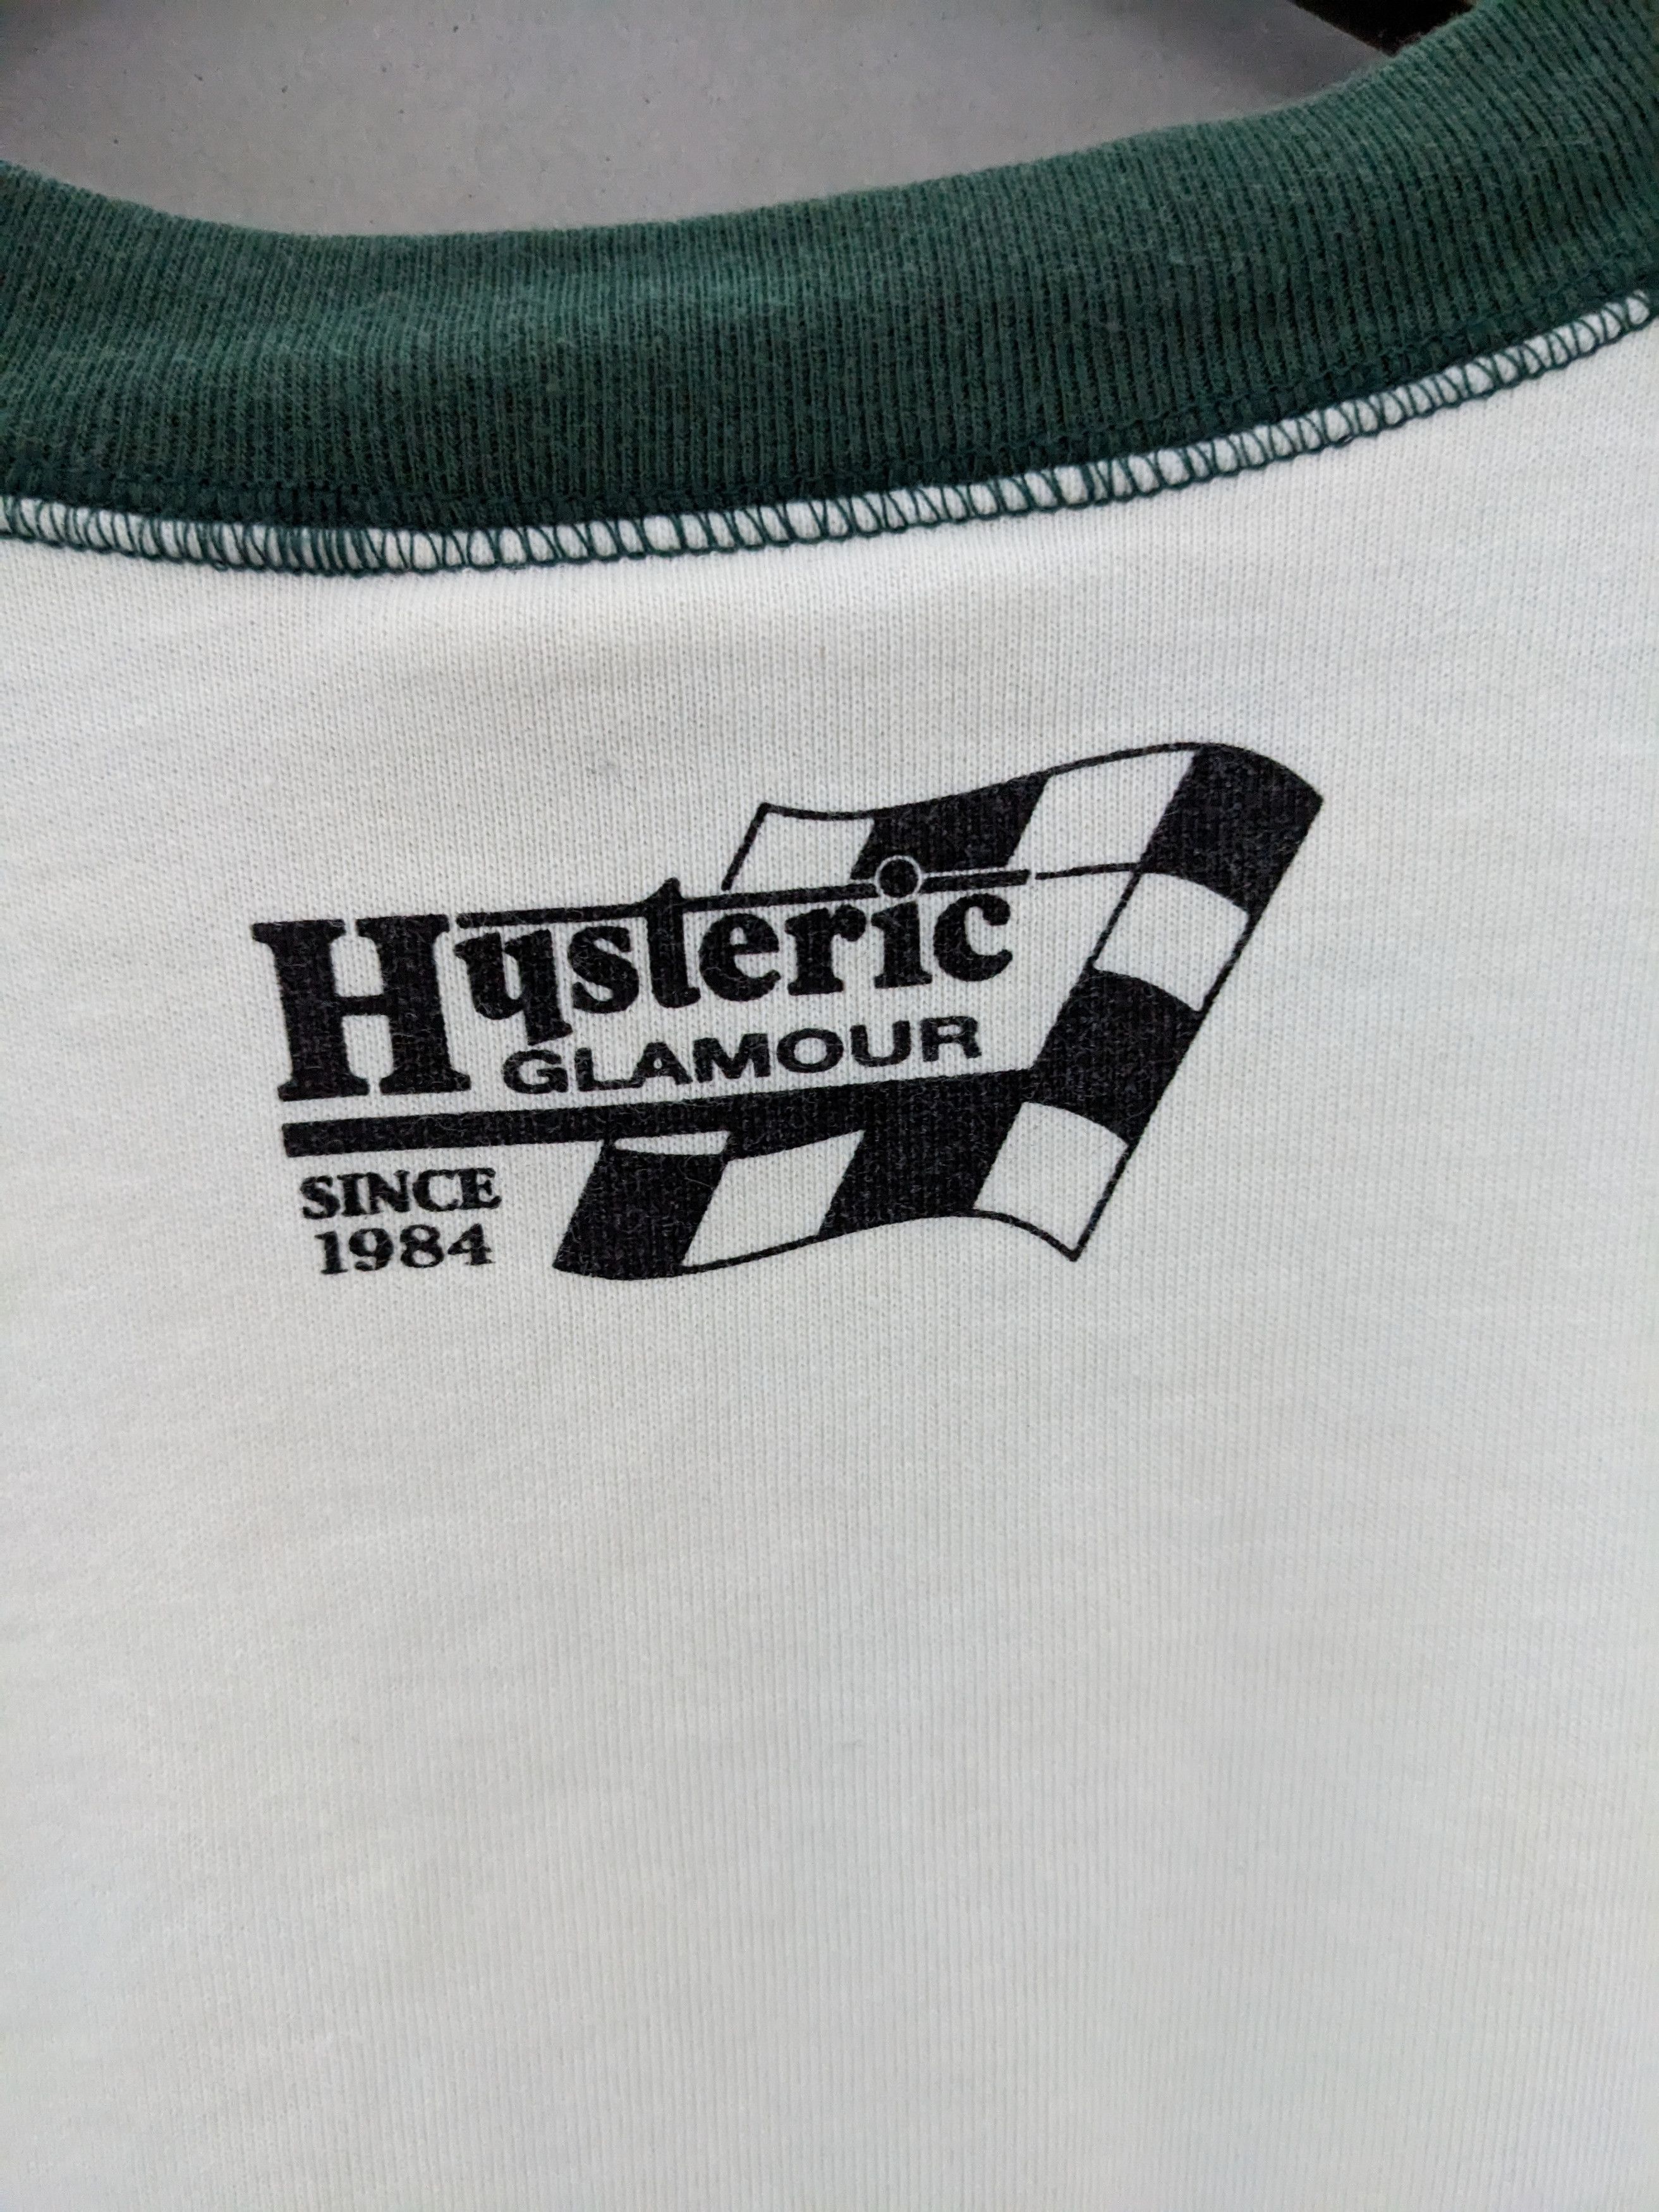 Hysteric Glamour Spellout White Green Stars Sweatshirt - 7